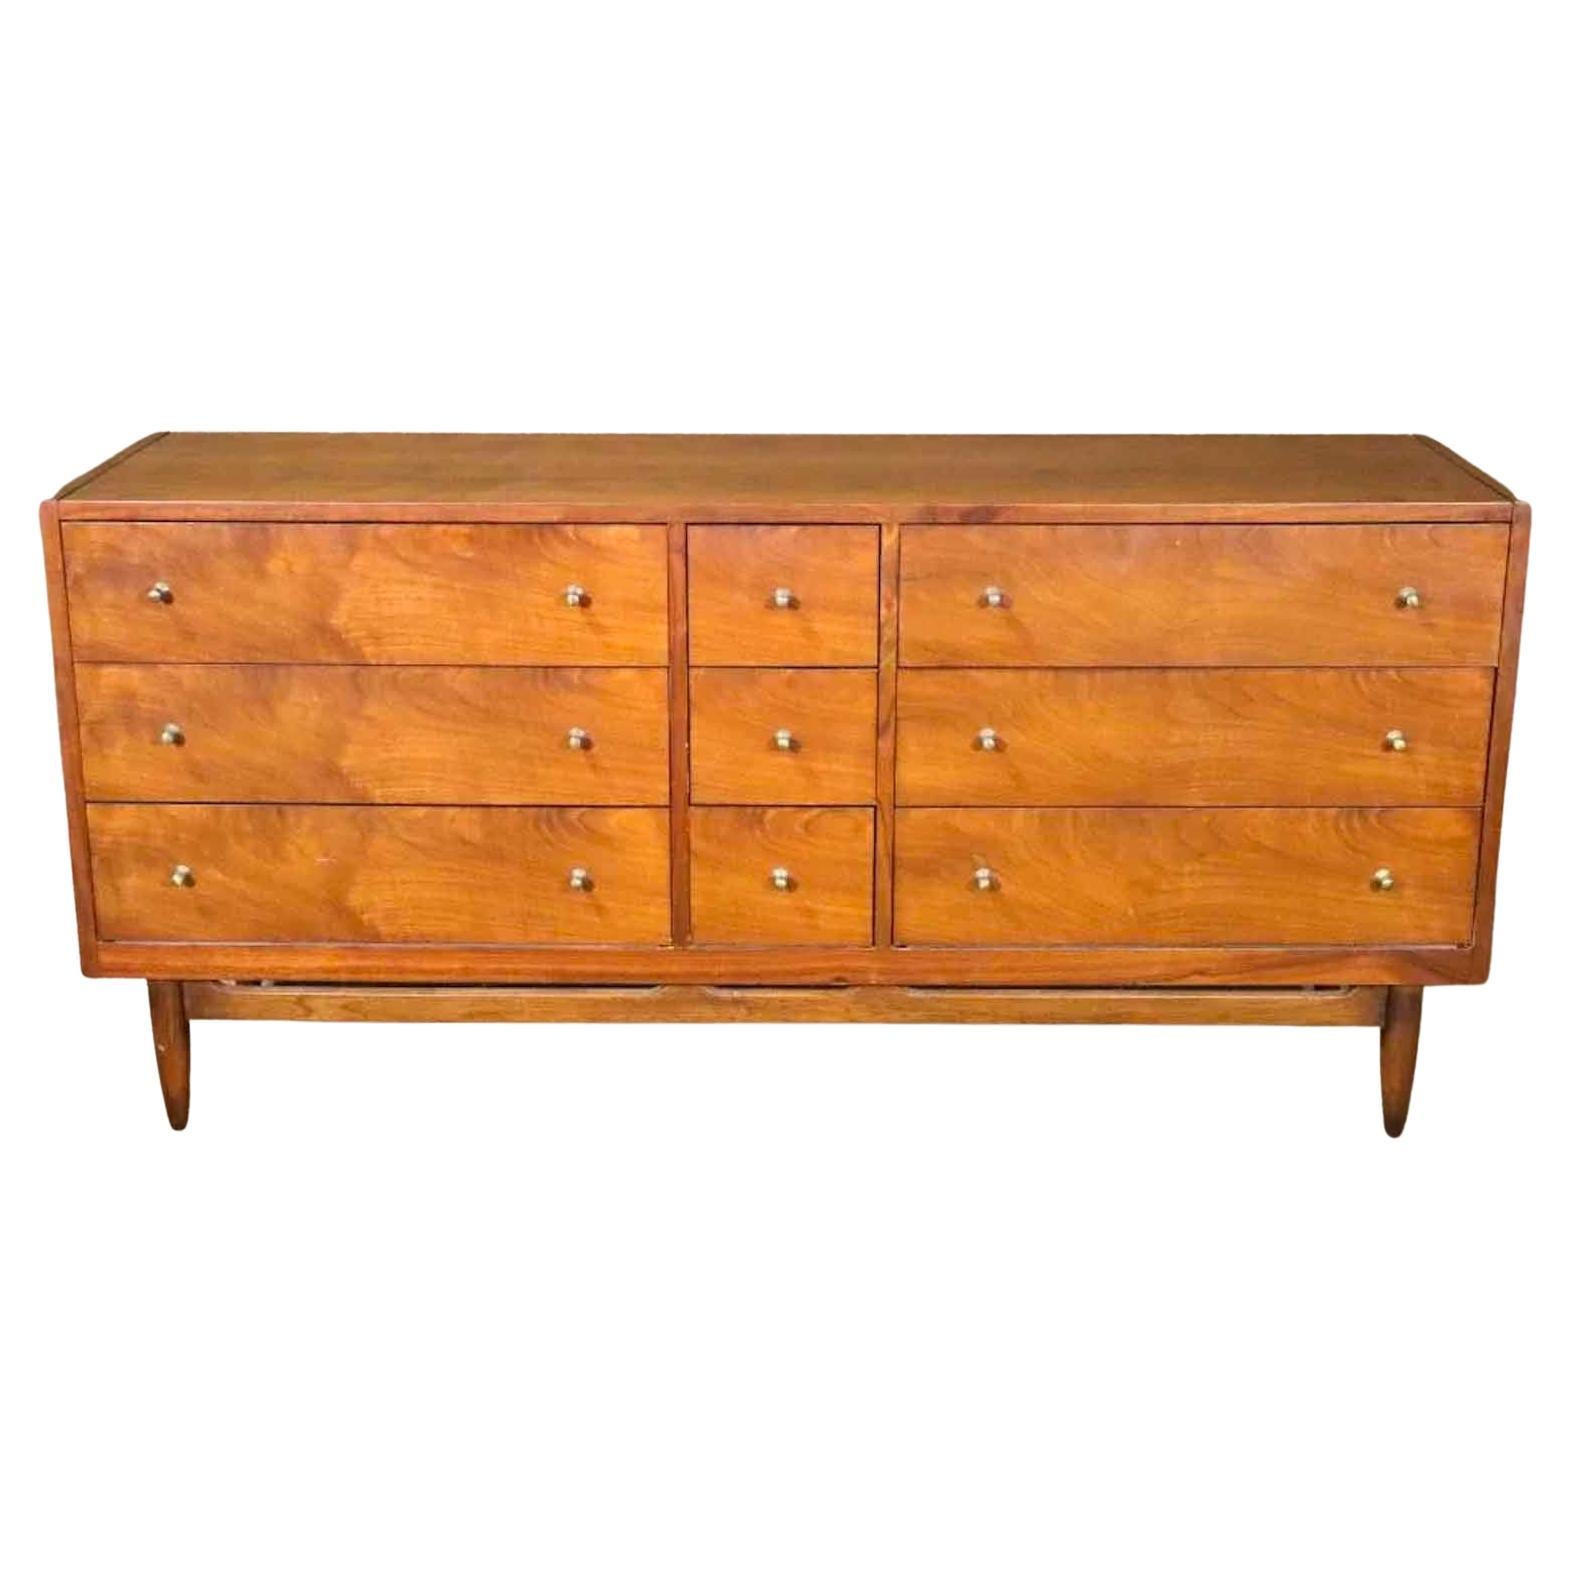 Mid-Century Dresser by National Furniture Co